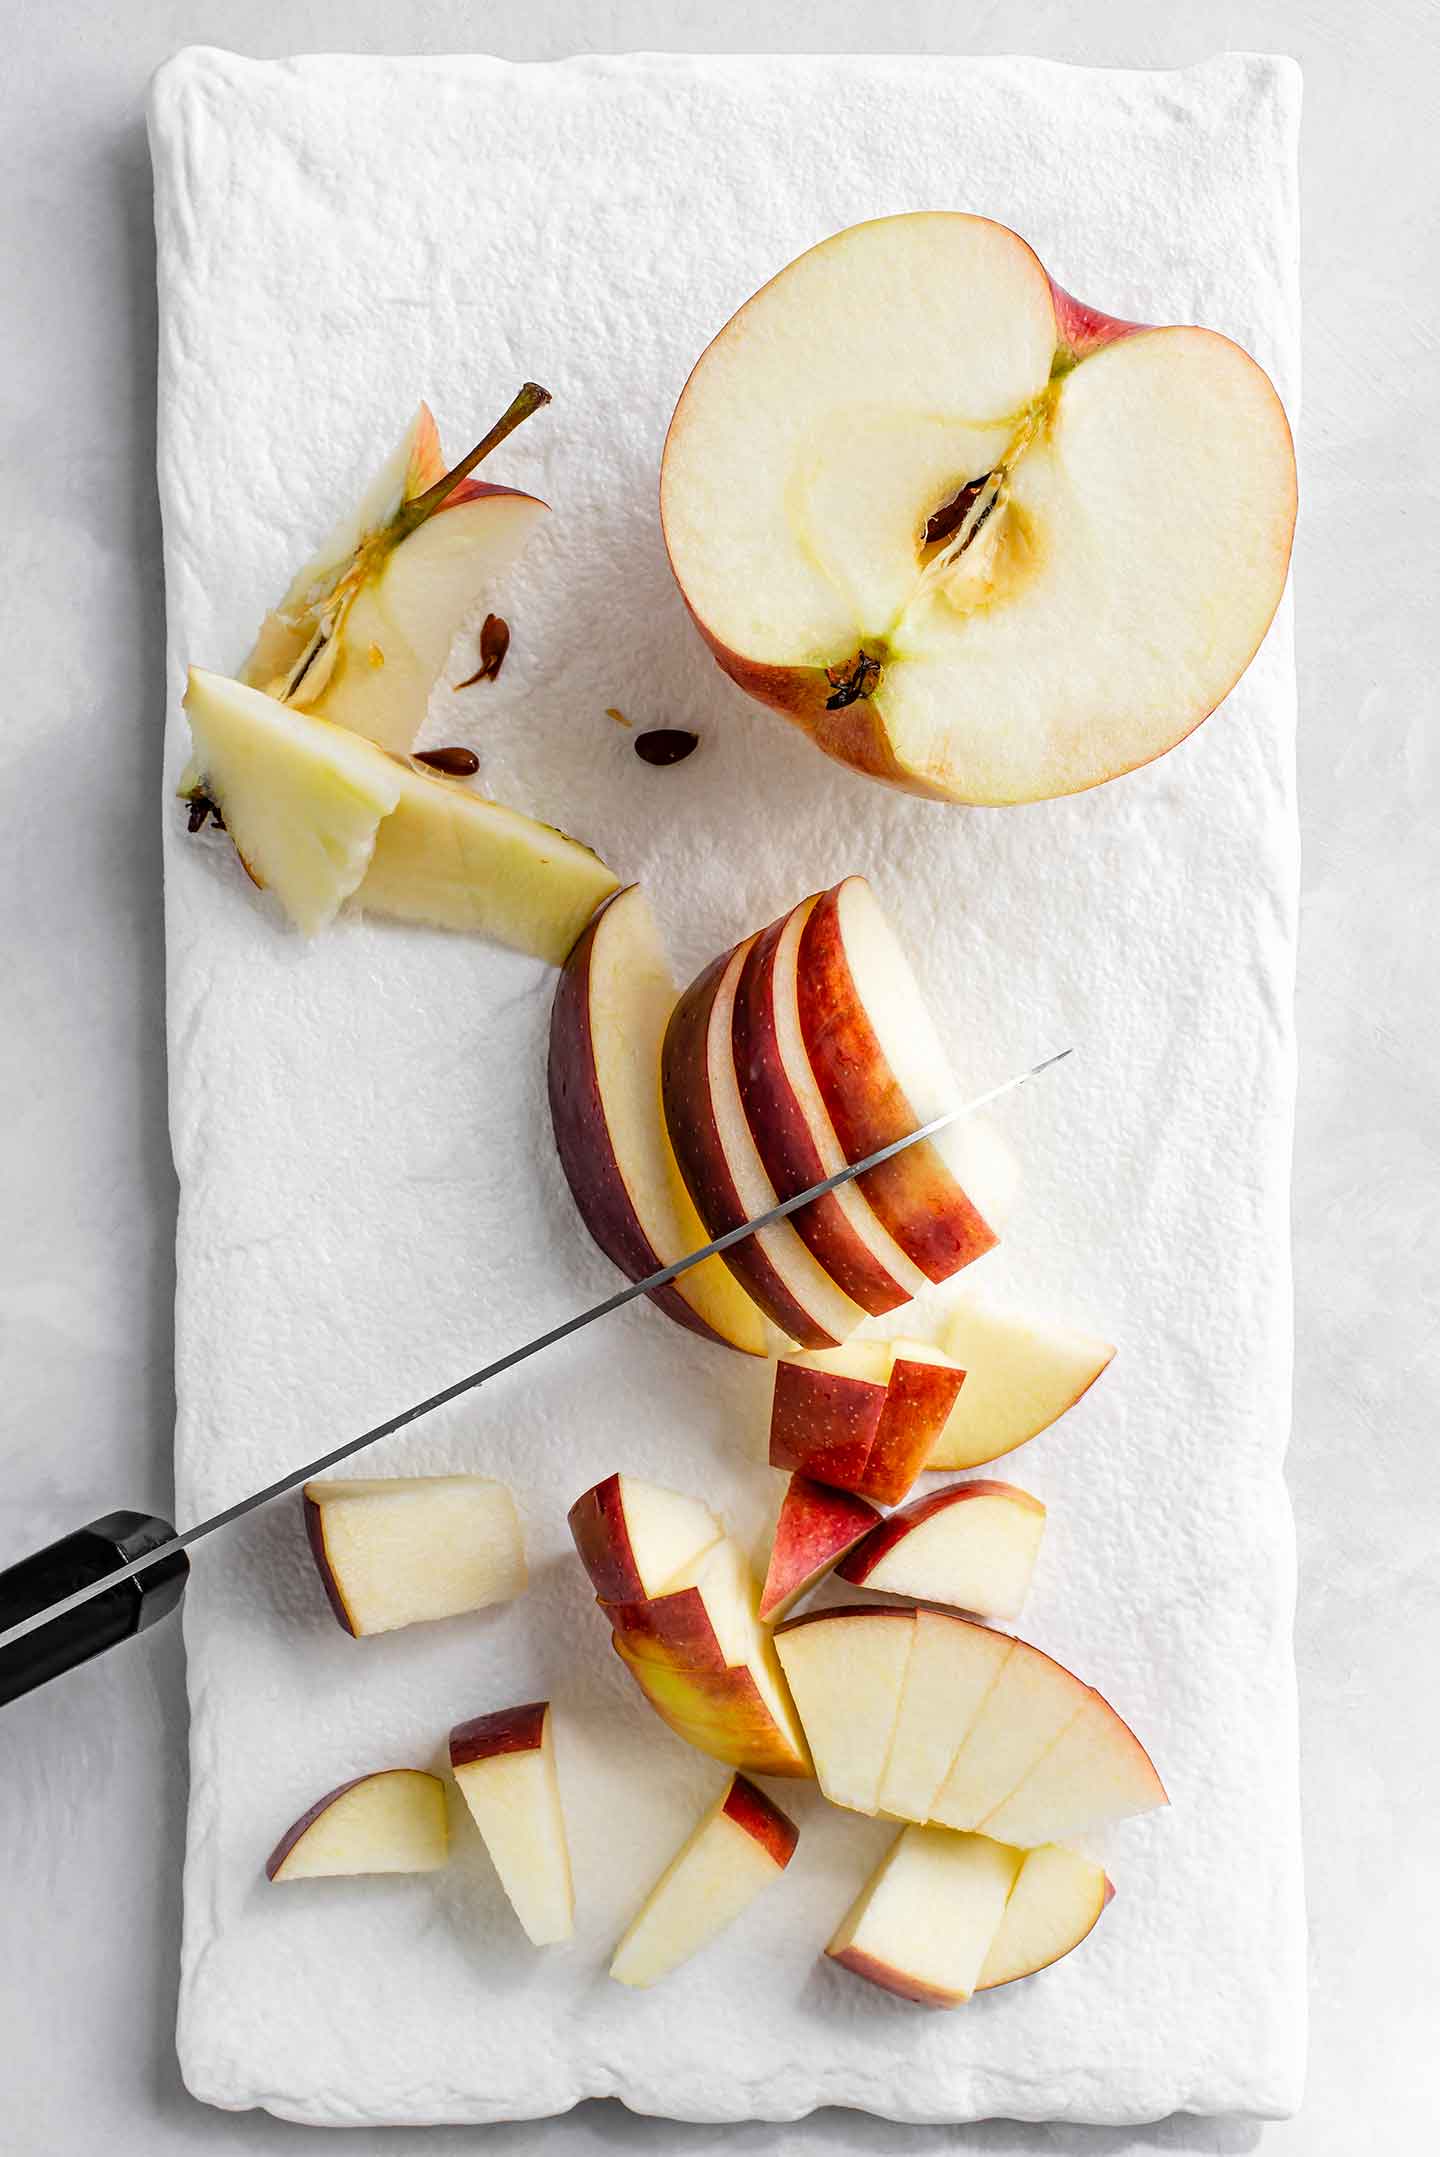 Top down view of an empire apple being cored and diced on a white tray.